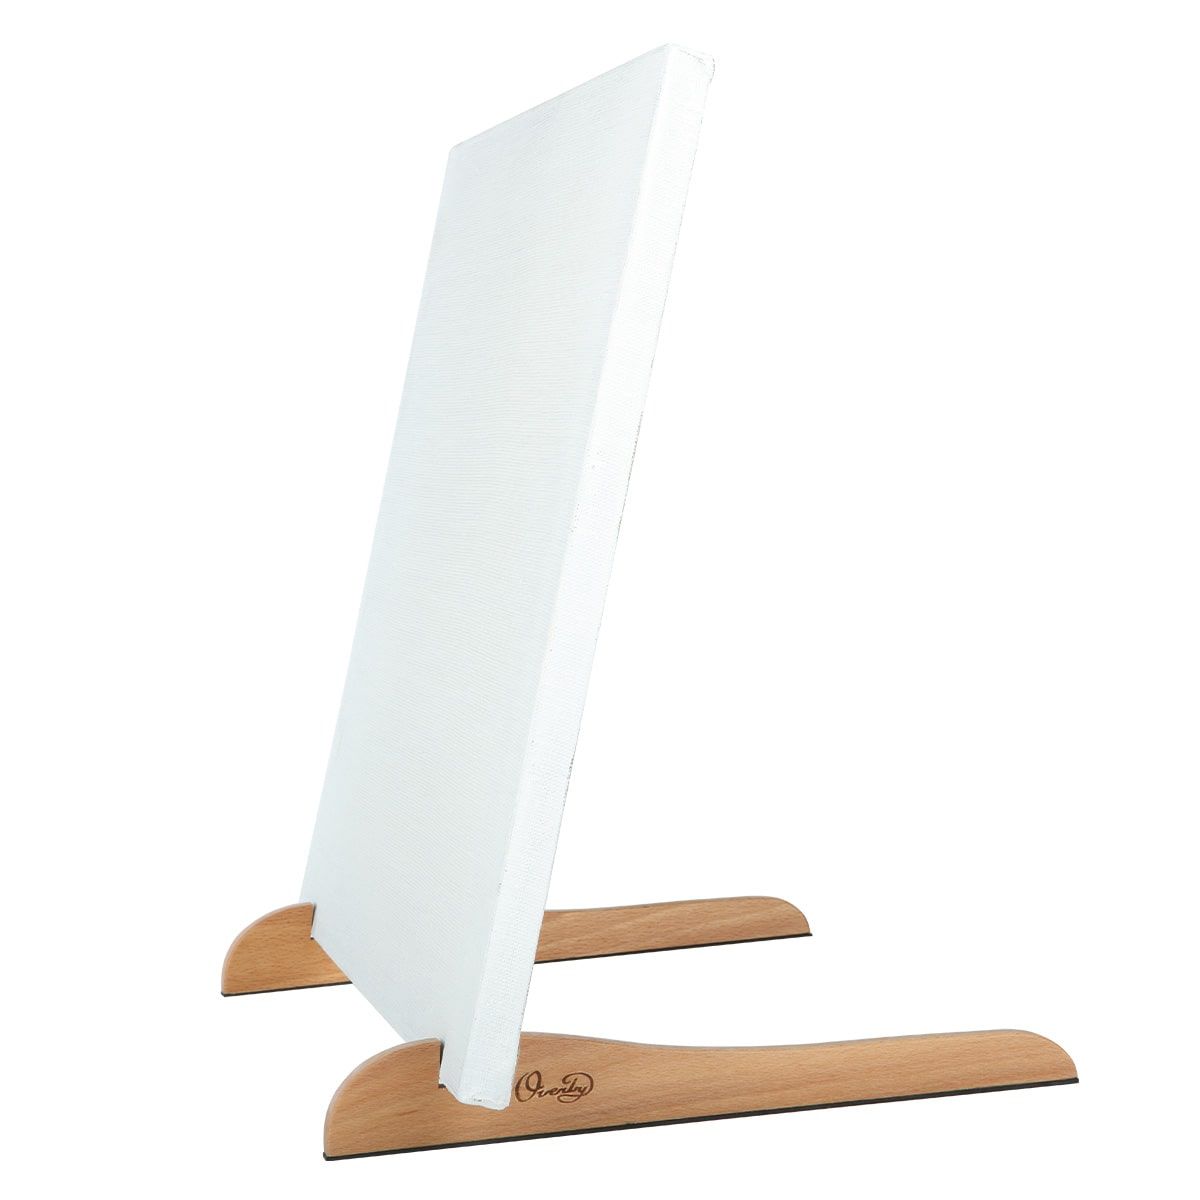 Holds canvas up to 30" high